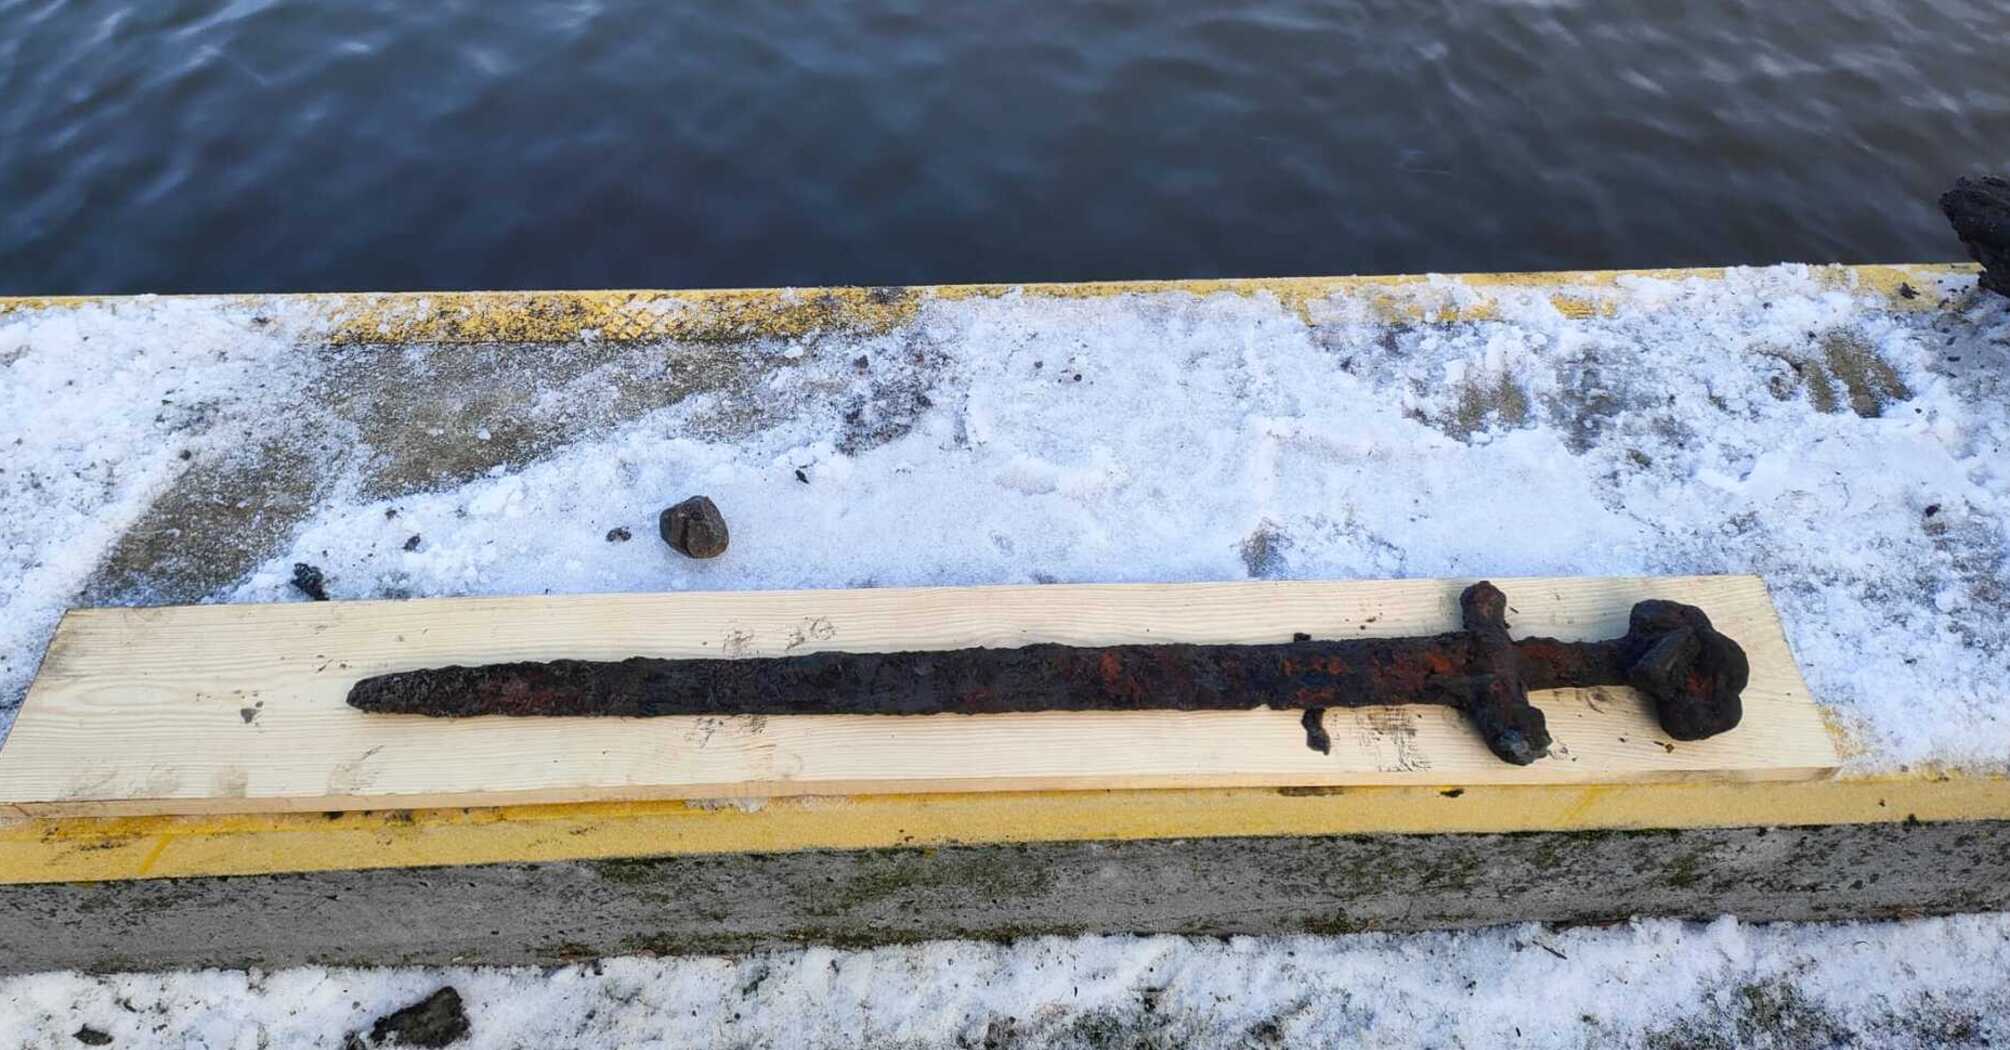 Unique ancient sword fished out of the Vistula River in Poland (photo)